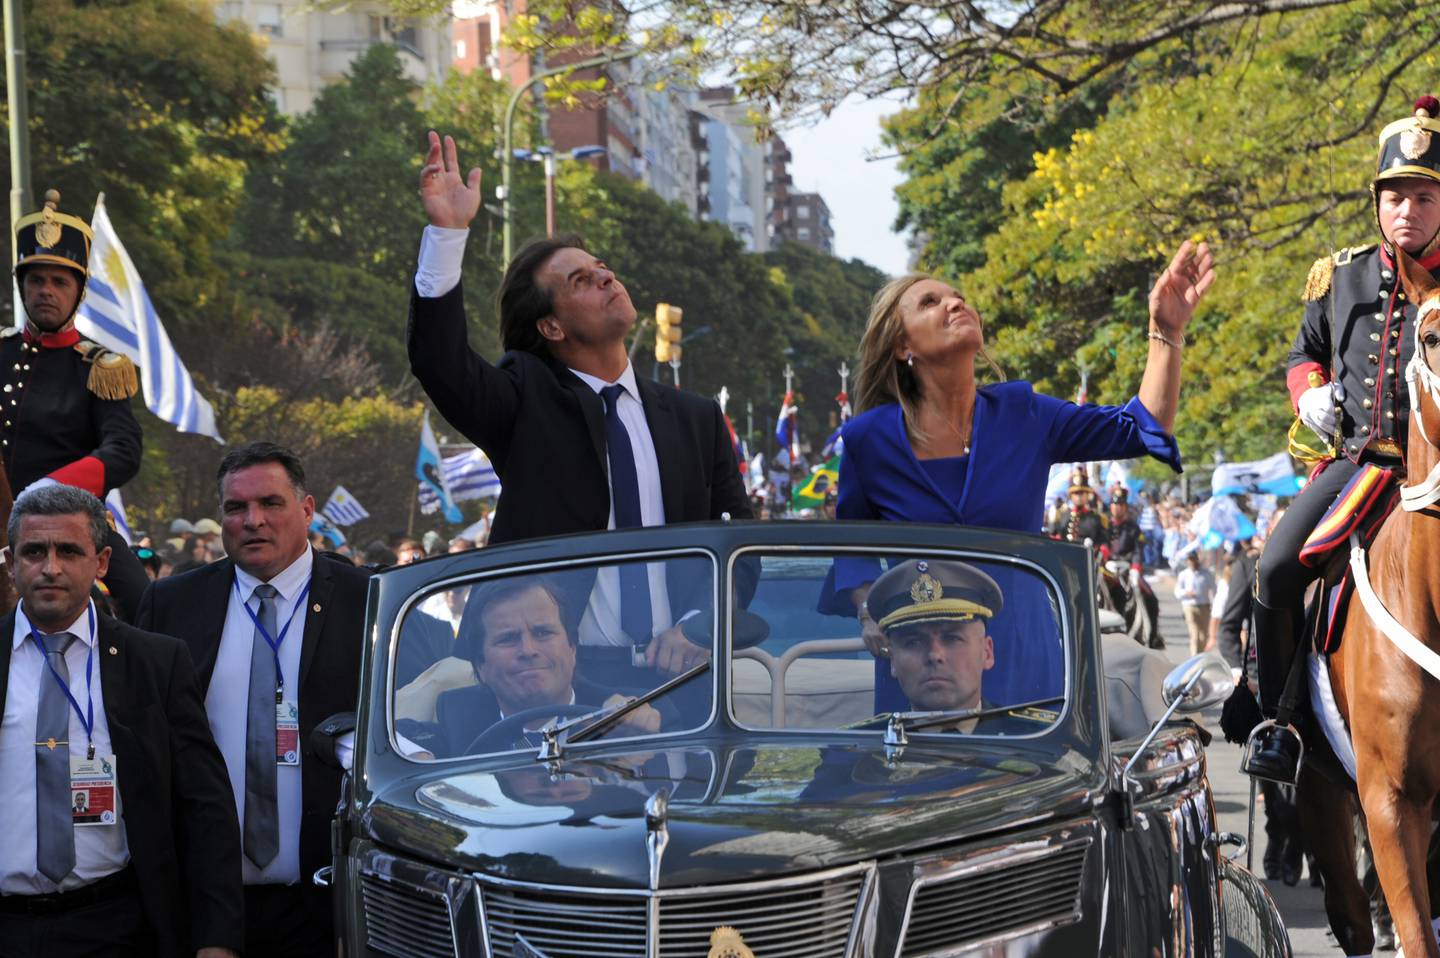 President Lacalle Pou's security detail was headed by Alejandro Astesiano (pictured to the right of the president's vehicle during his investiture on March 1, 2020.dfd